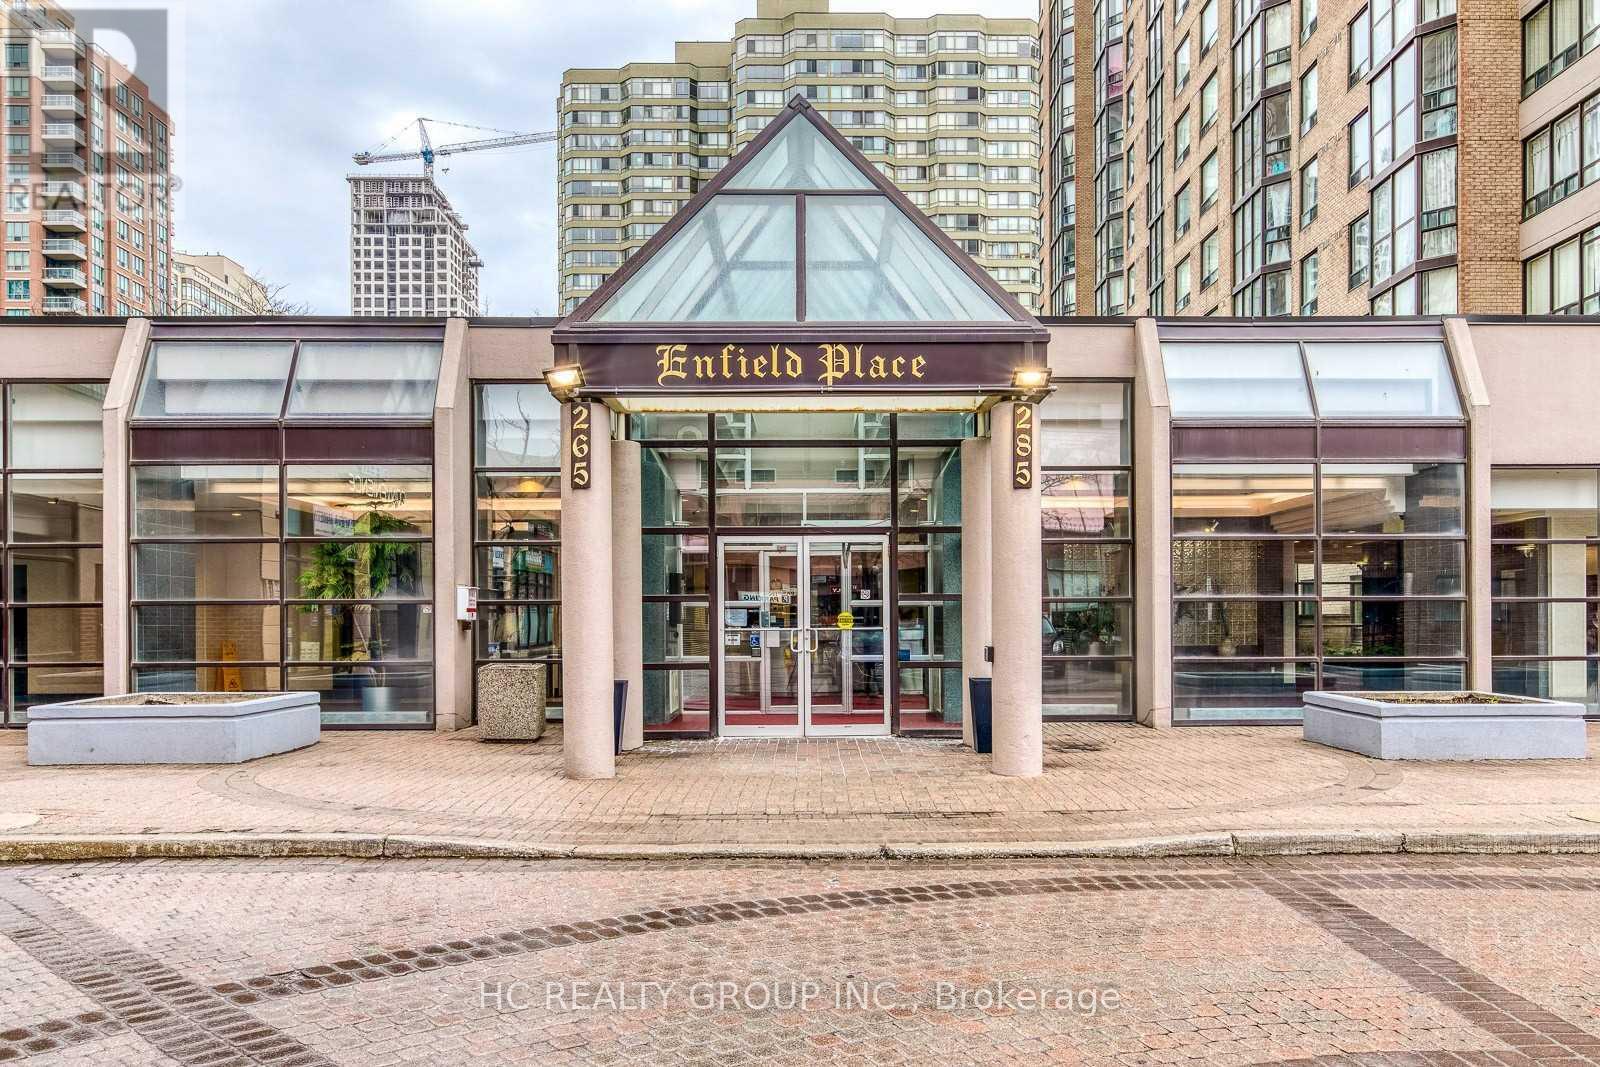 2106 - 285 ENFIELD PLACE, mississauga, Ontario